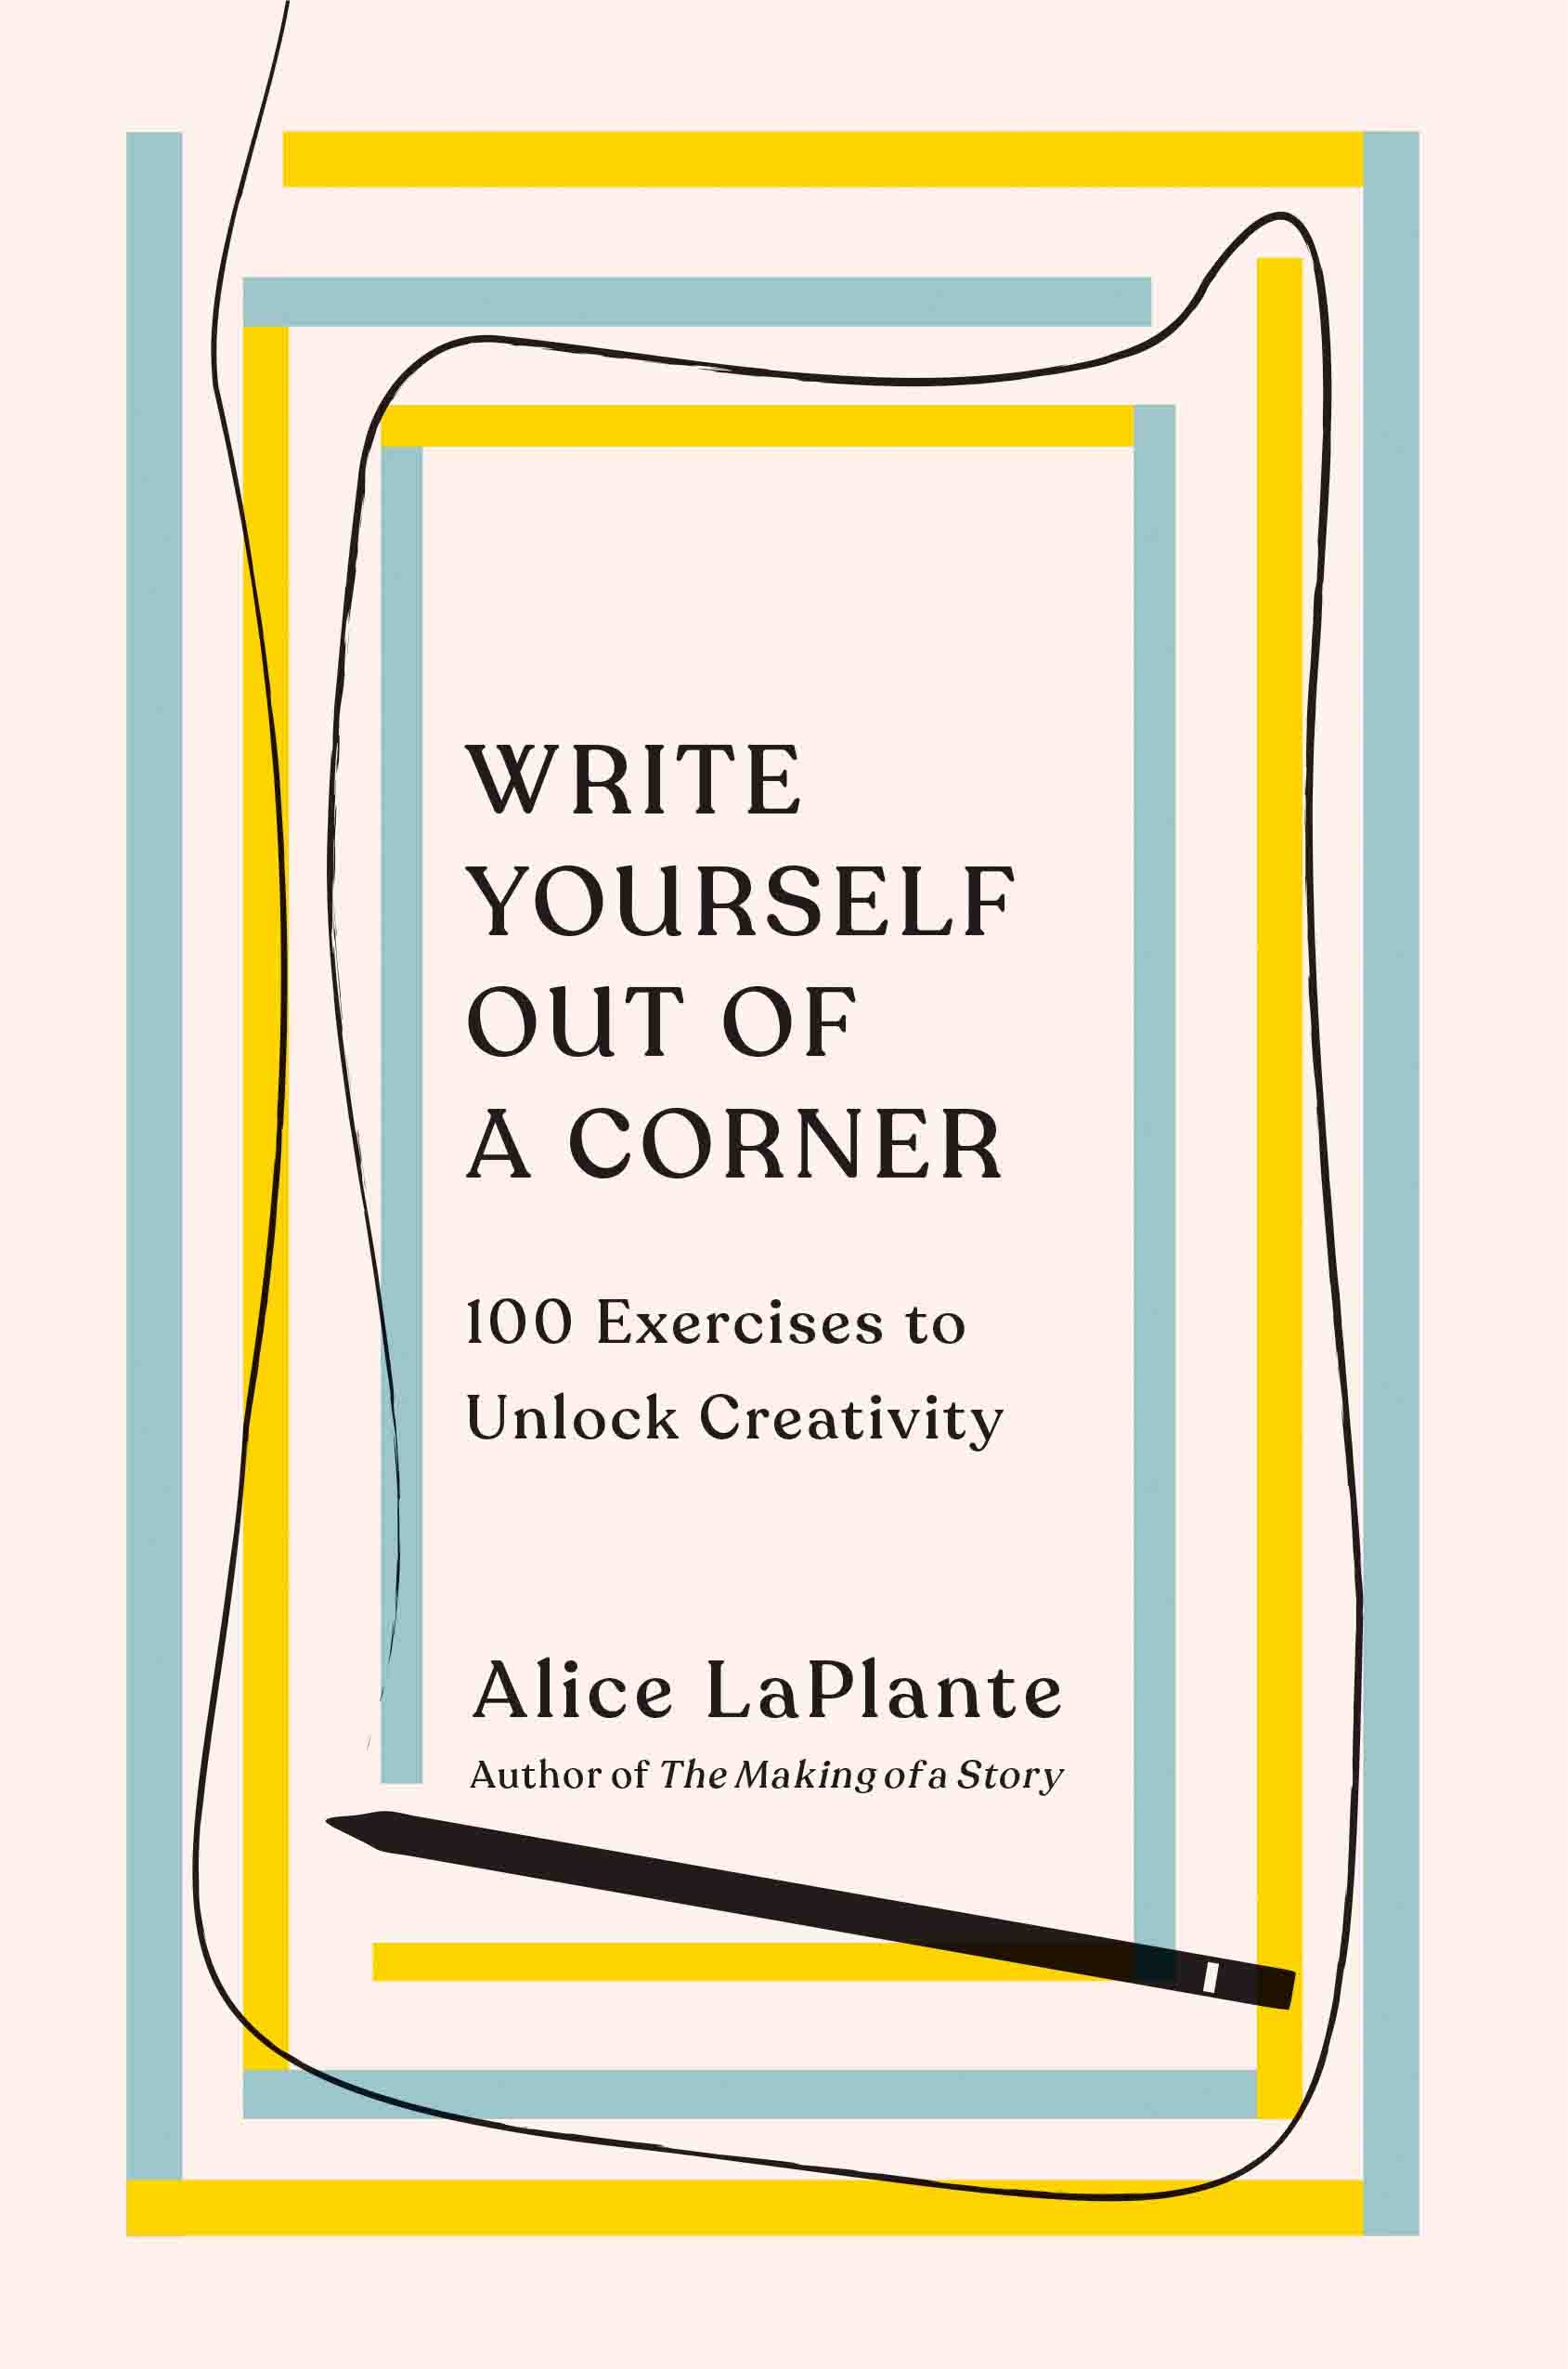 Write-Yourself-Out-Of-A-Corner_Design-by-Kelly-Blair_AD_Richard-Ljoenes